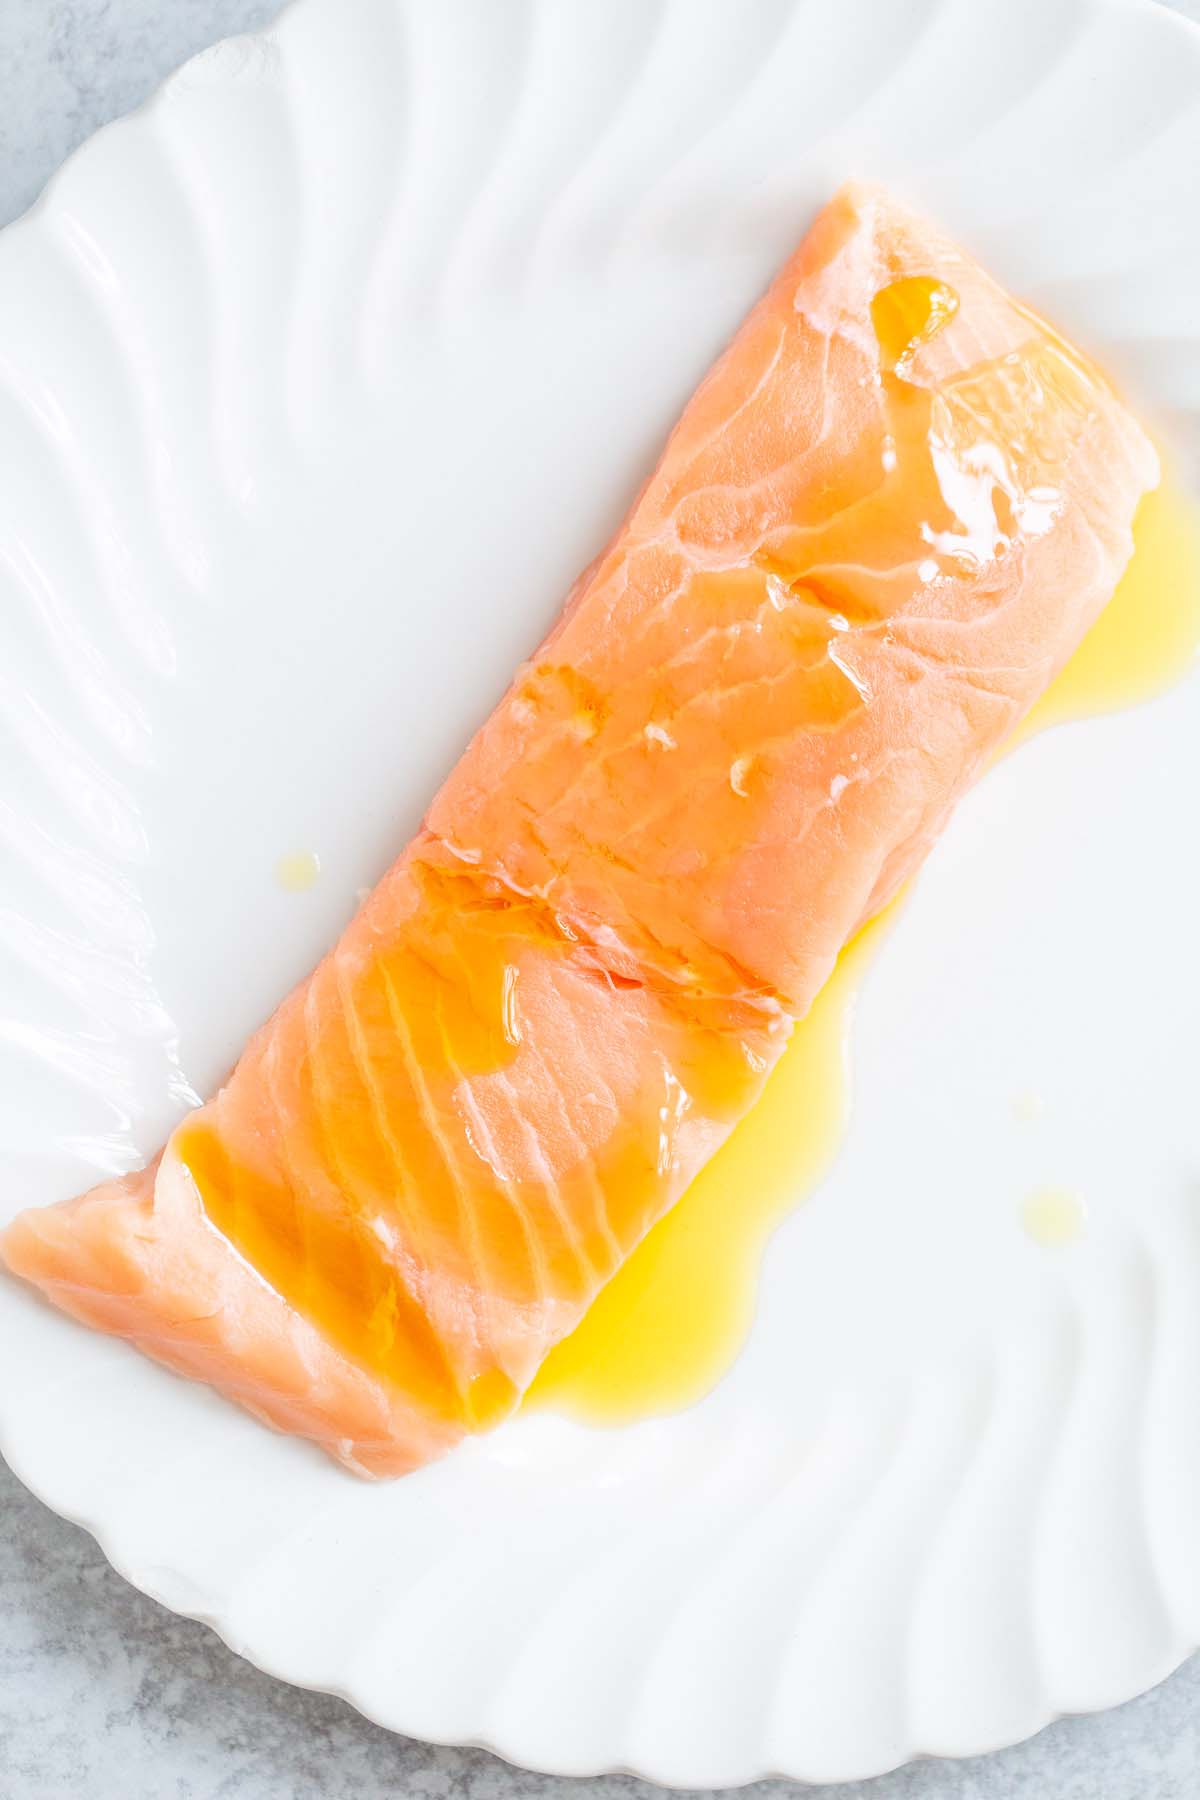 Salmon drizzled with olive oil.